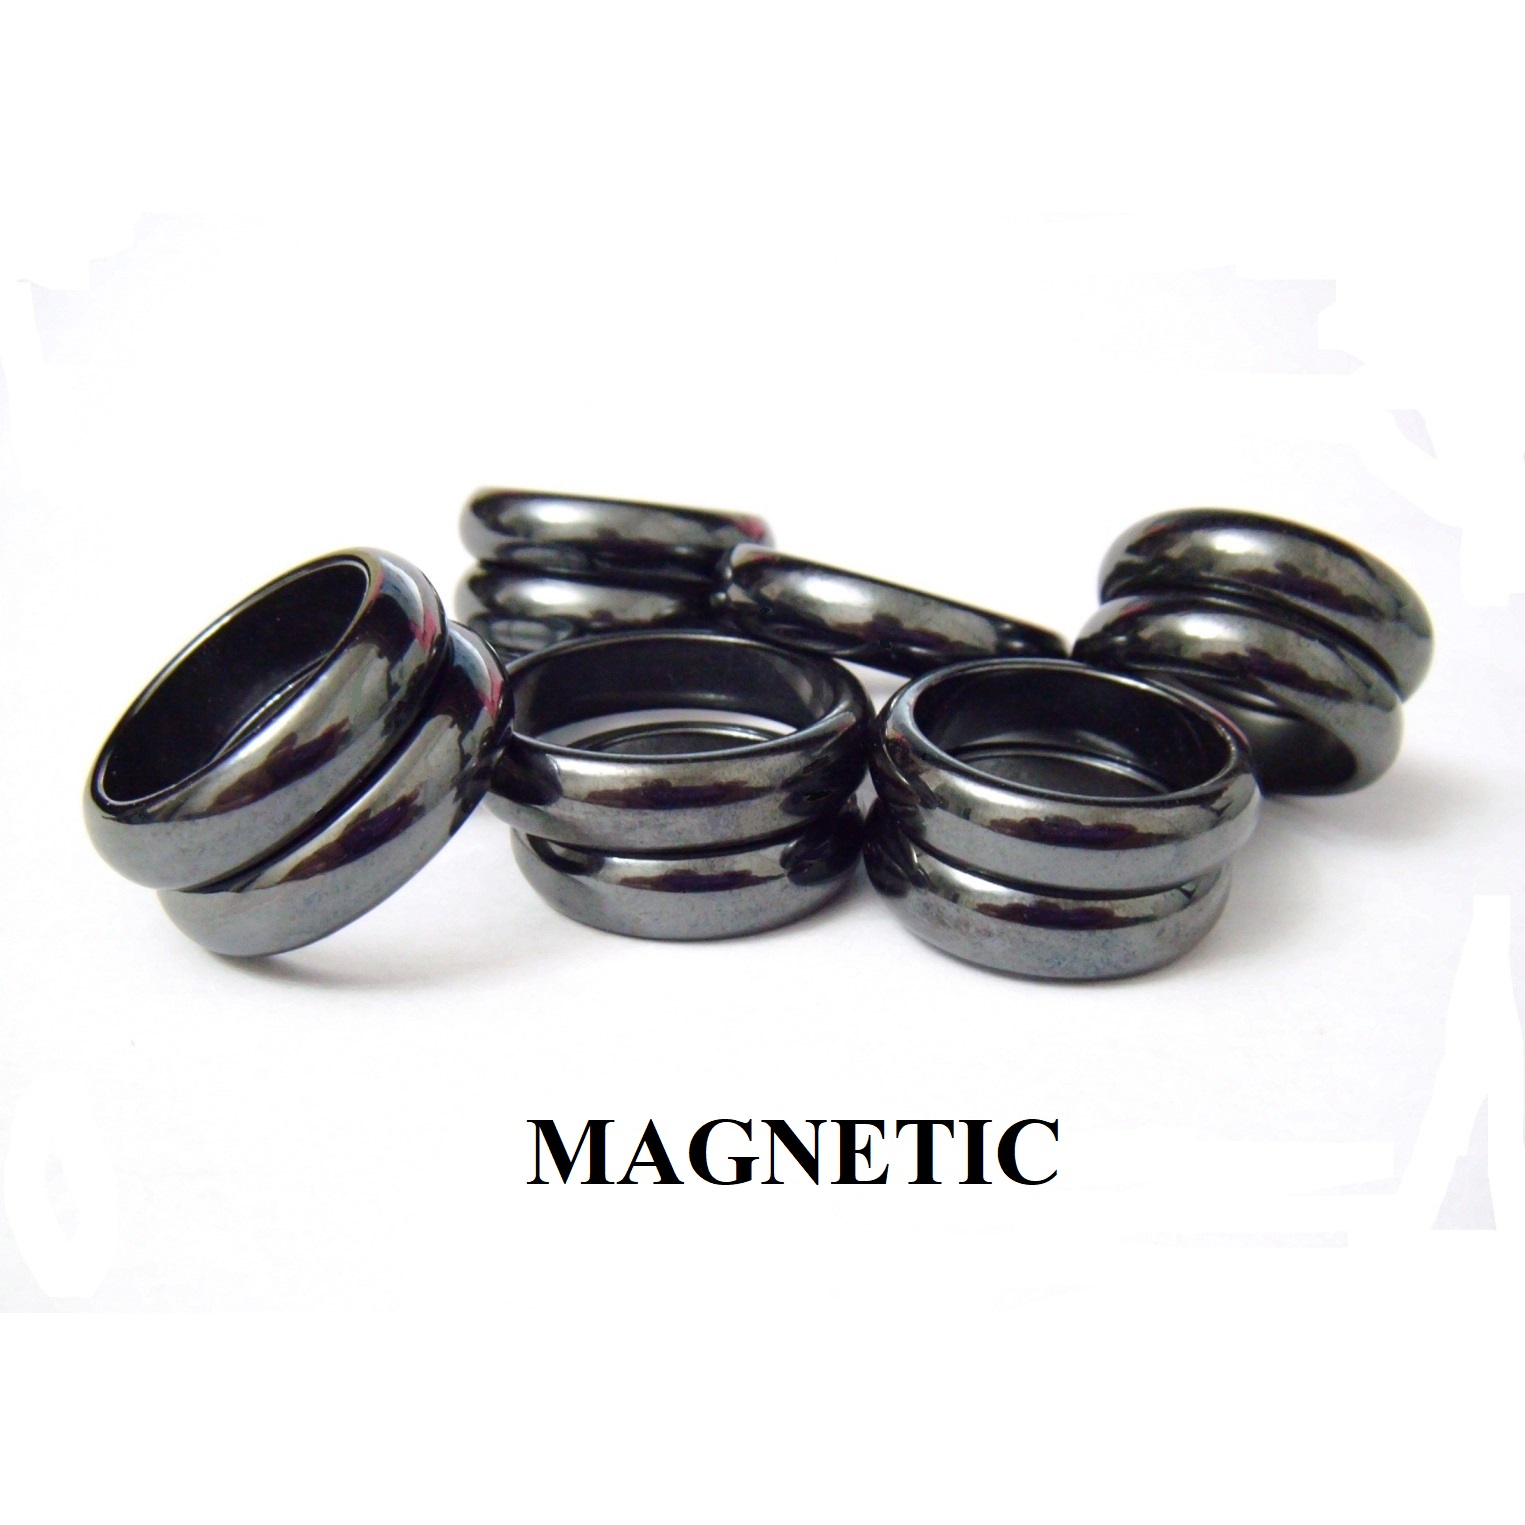 12 PC. MAGNETIC Mixed Sizes 6mm Wide Smooth Dome Top Hematite Magnetic Rings #CSR